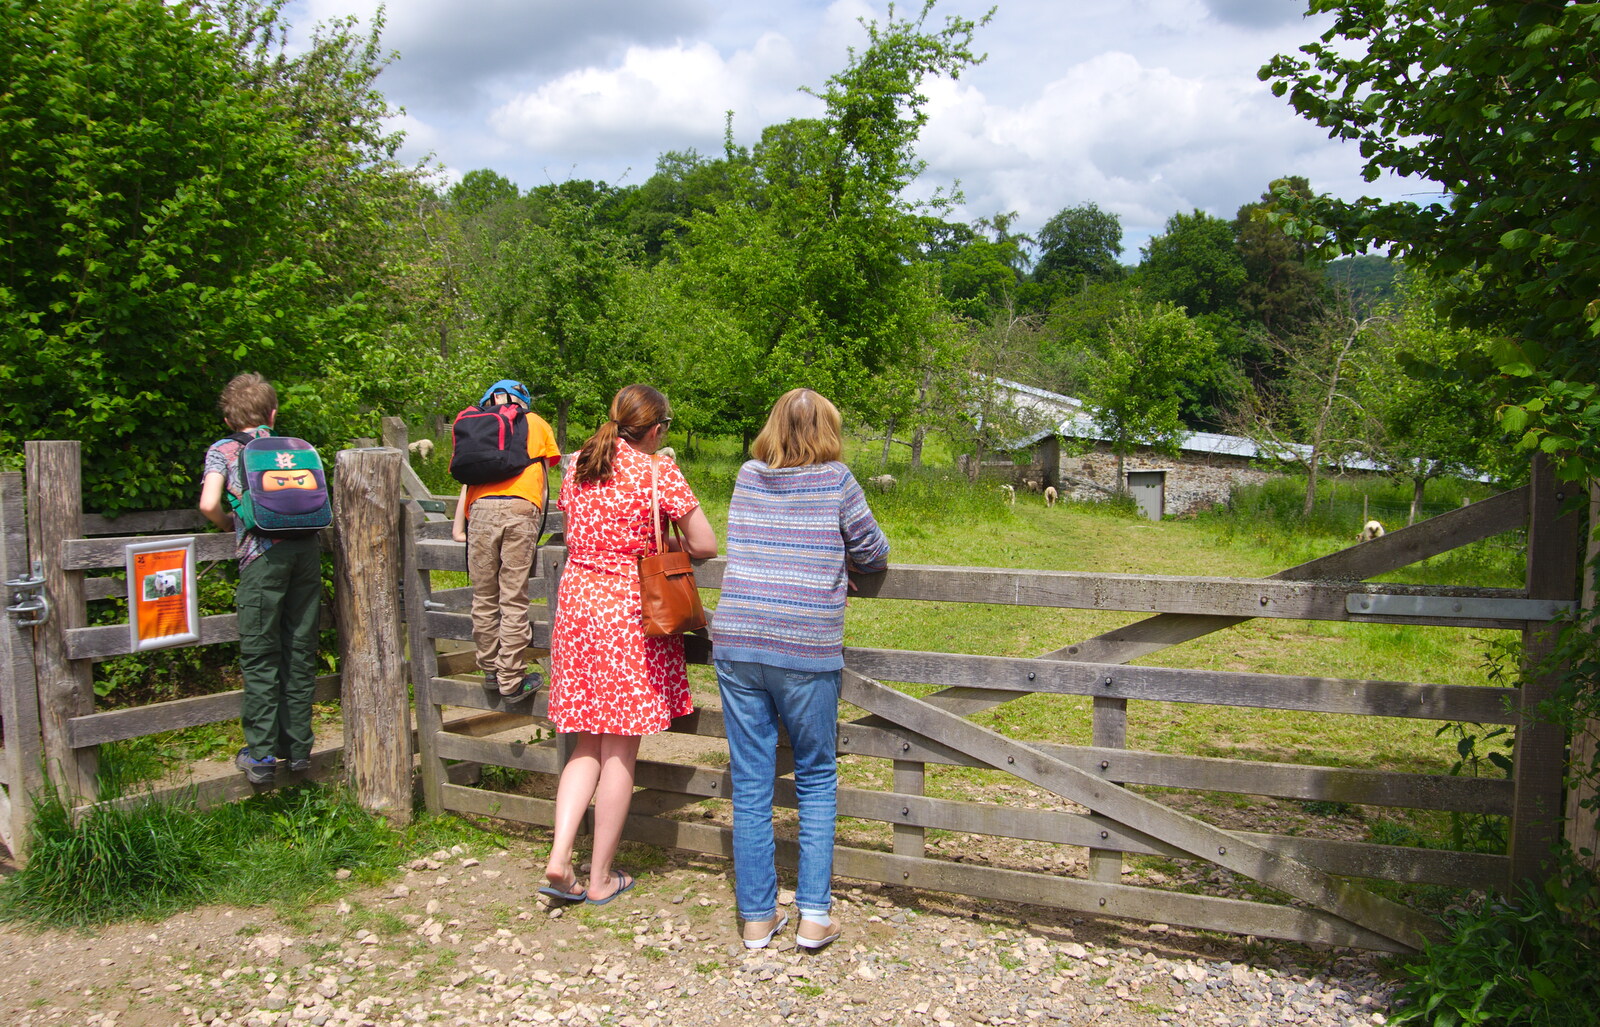 Chagford Lido and a Trip to Parke, Bovey Tracey, Devon - 25th May 2019: The gang hang on a gate and watch the sheep